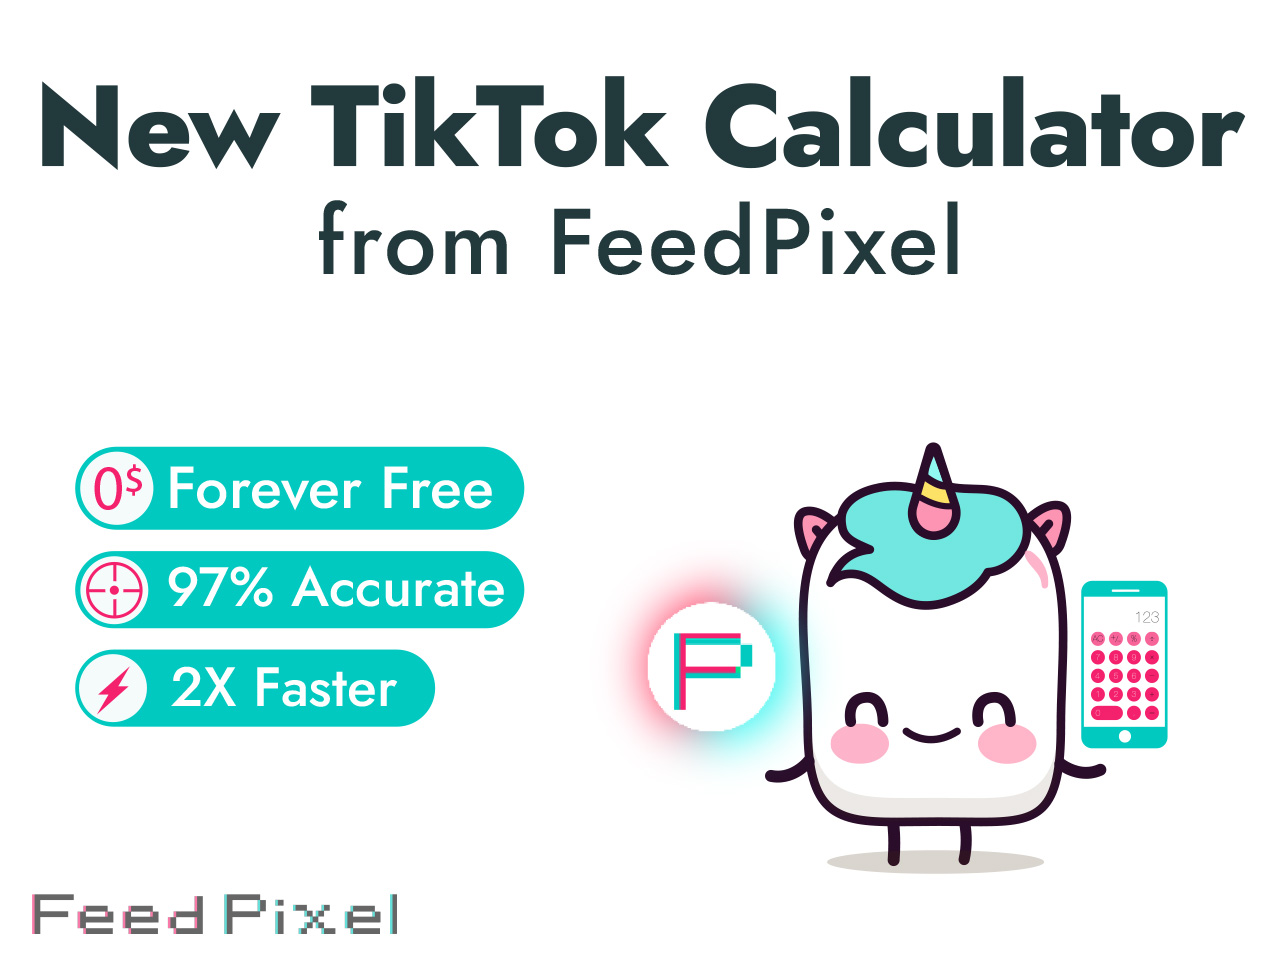 FeedPixel's New TikTok Calculator Measures the Earning Potential of a Post For Influencers